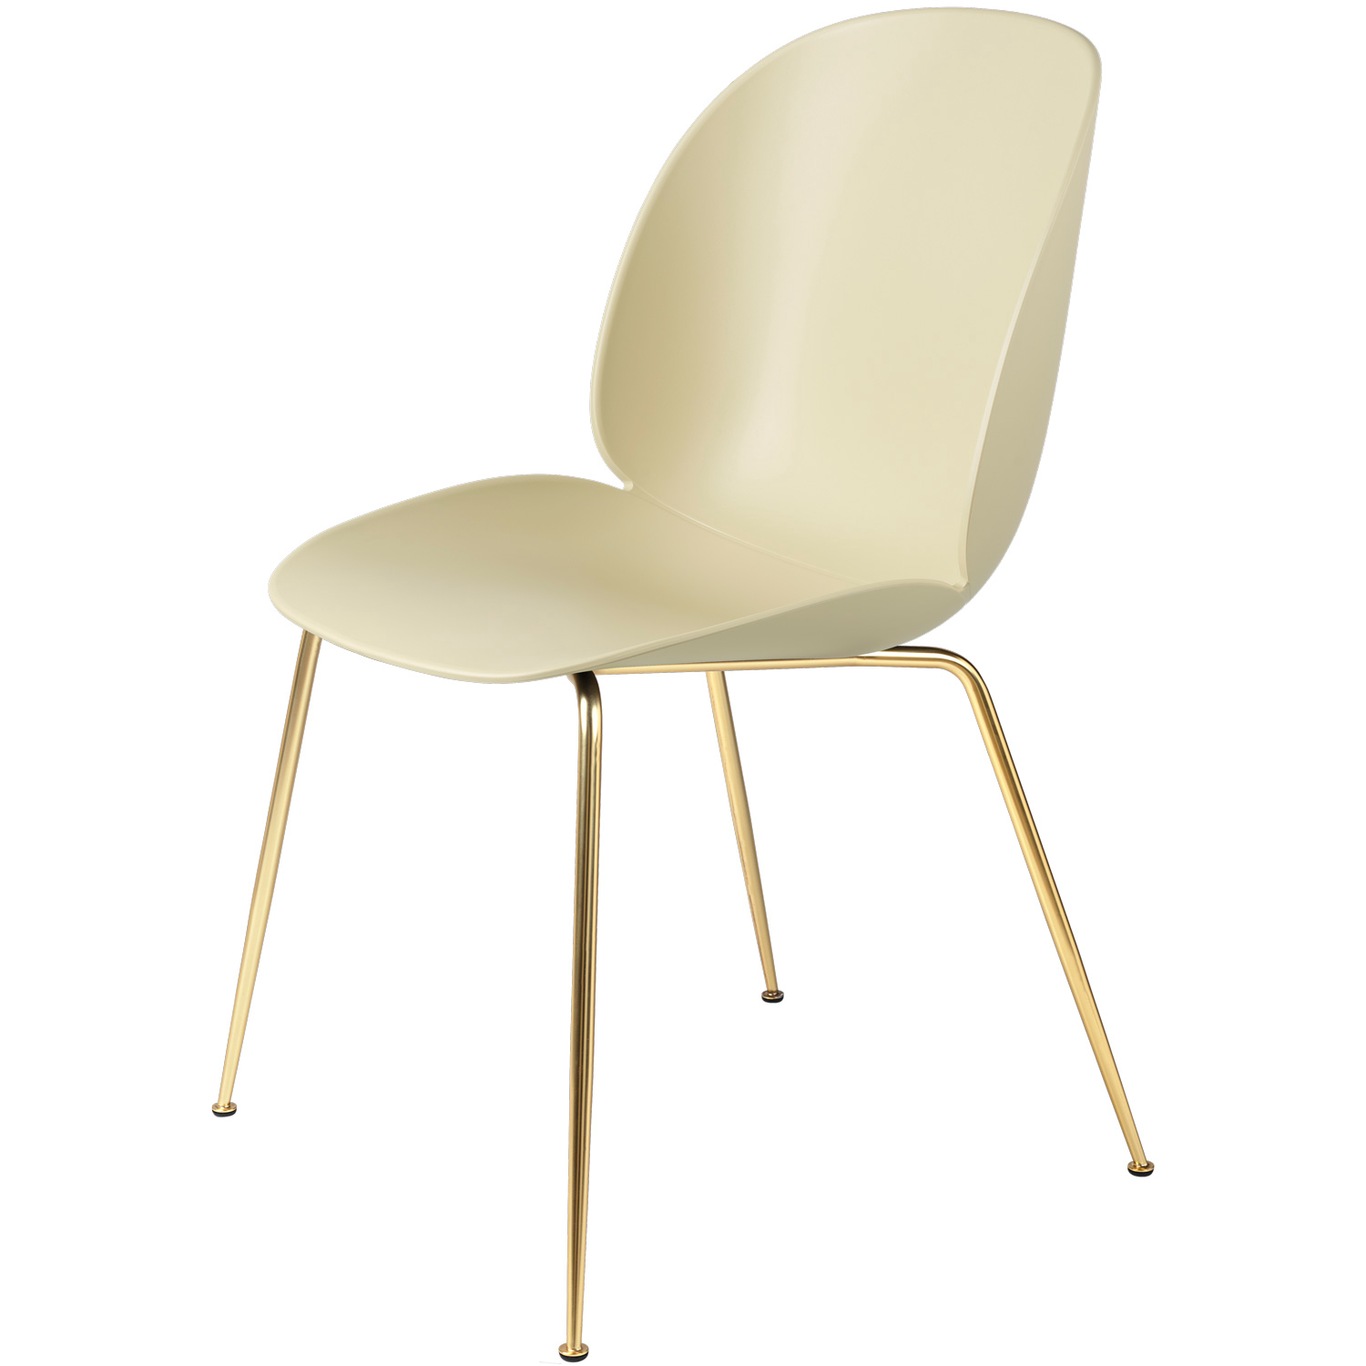 Beetle Dining Chair Un-upholstered, Conic Base Brass, Pastel Green